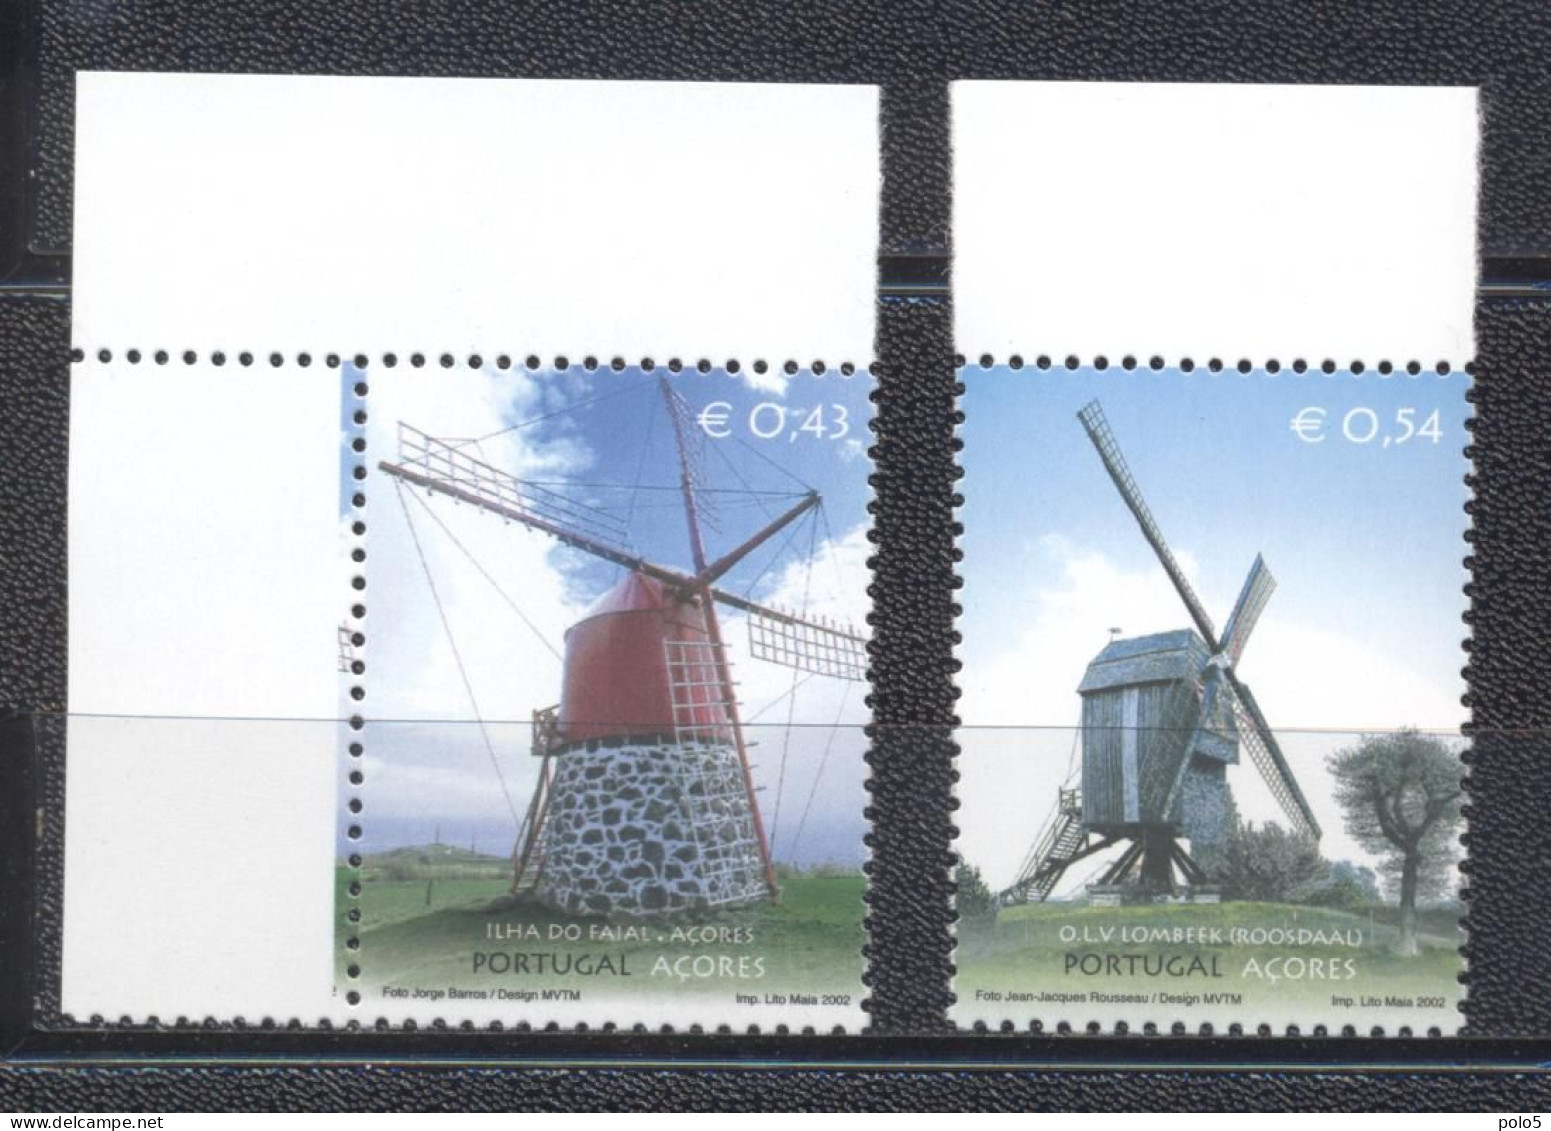 Açores 2002- Windmills (joint Issue With Belgim) Set (2v) - Azores